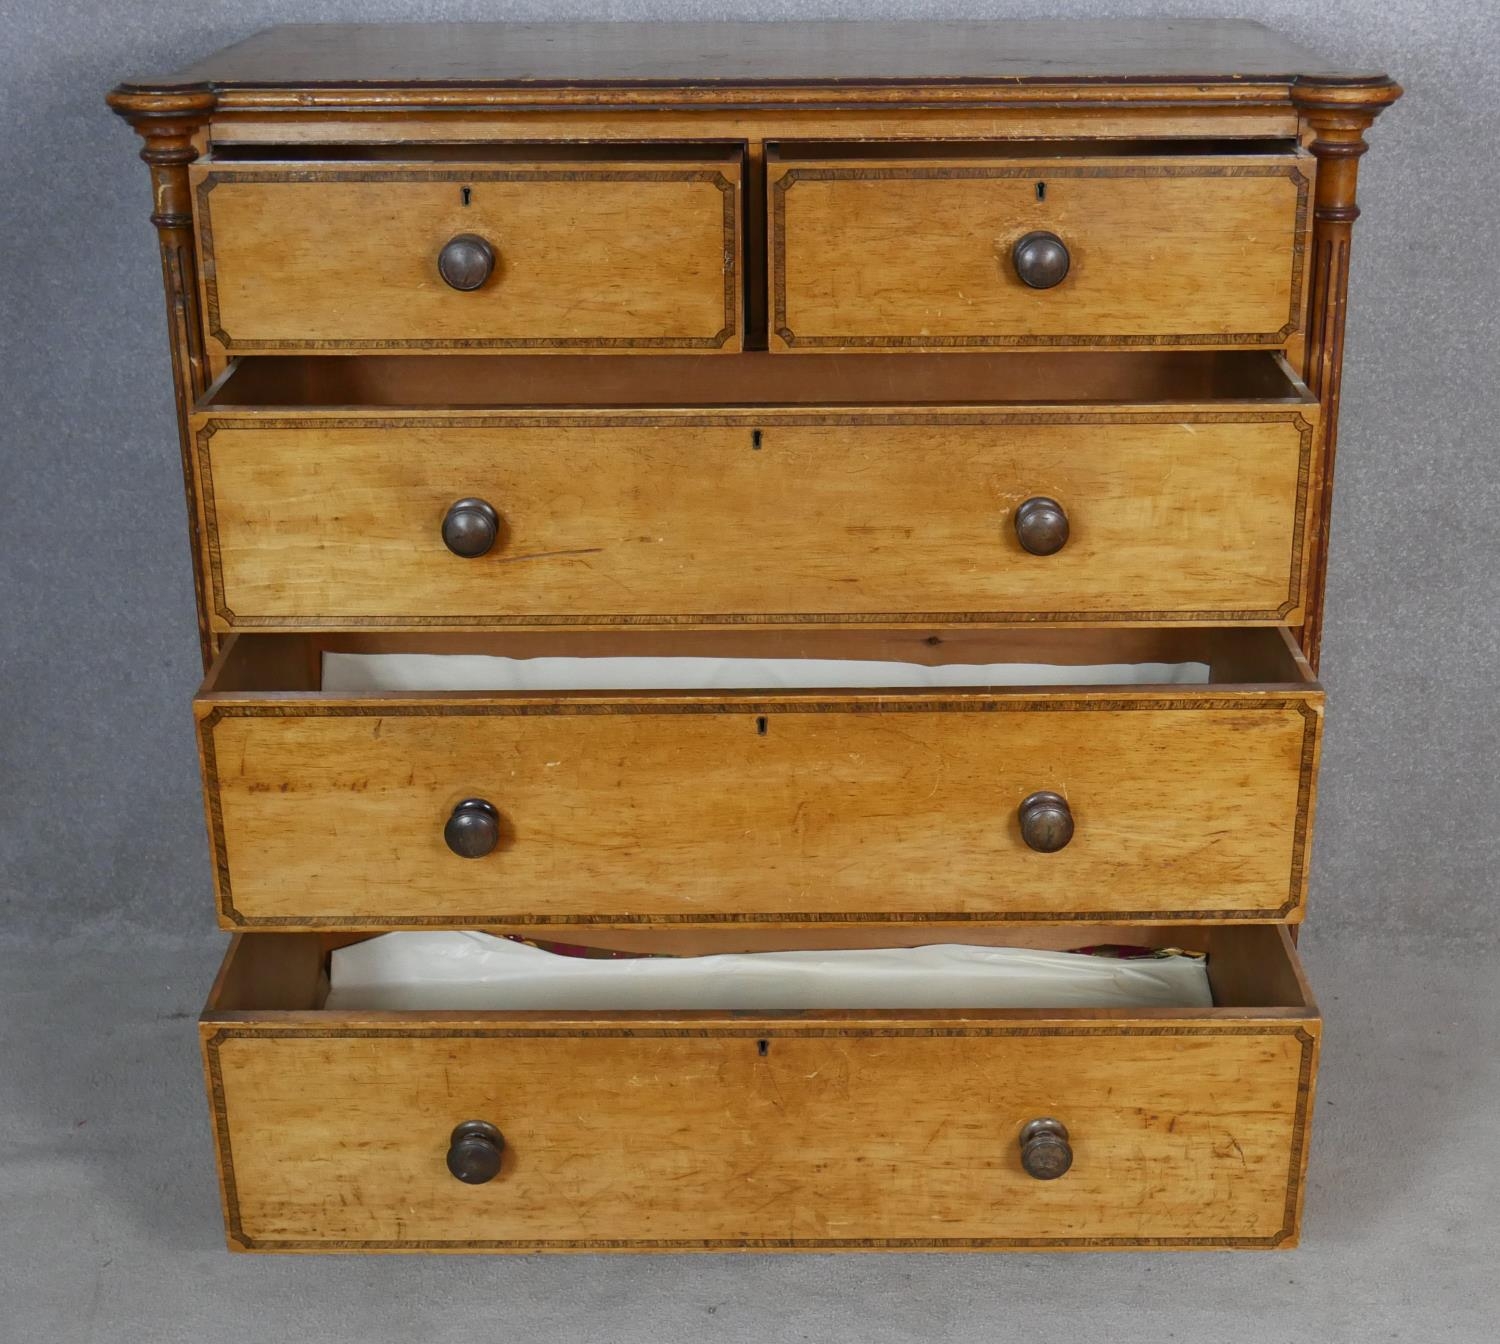 A late Victorian Aesthetic movement pitch pine chest of drawers with painted and ebonised decoration - Image 2 of 8